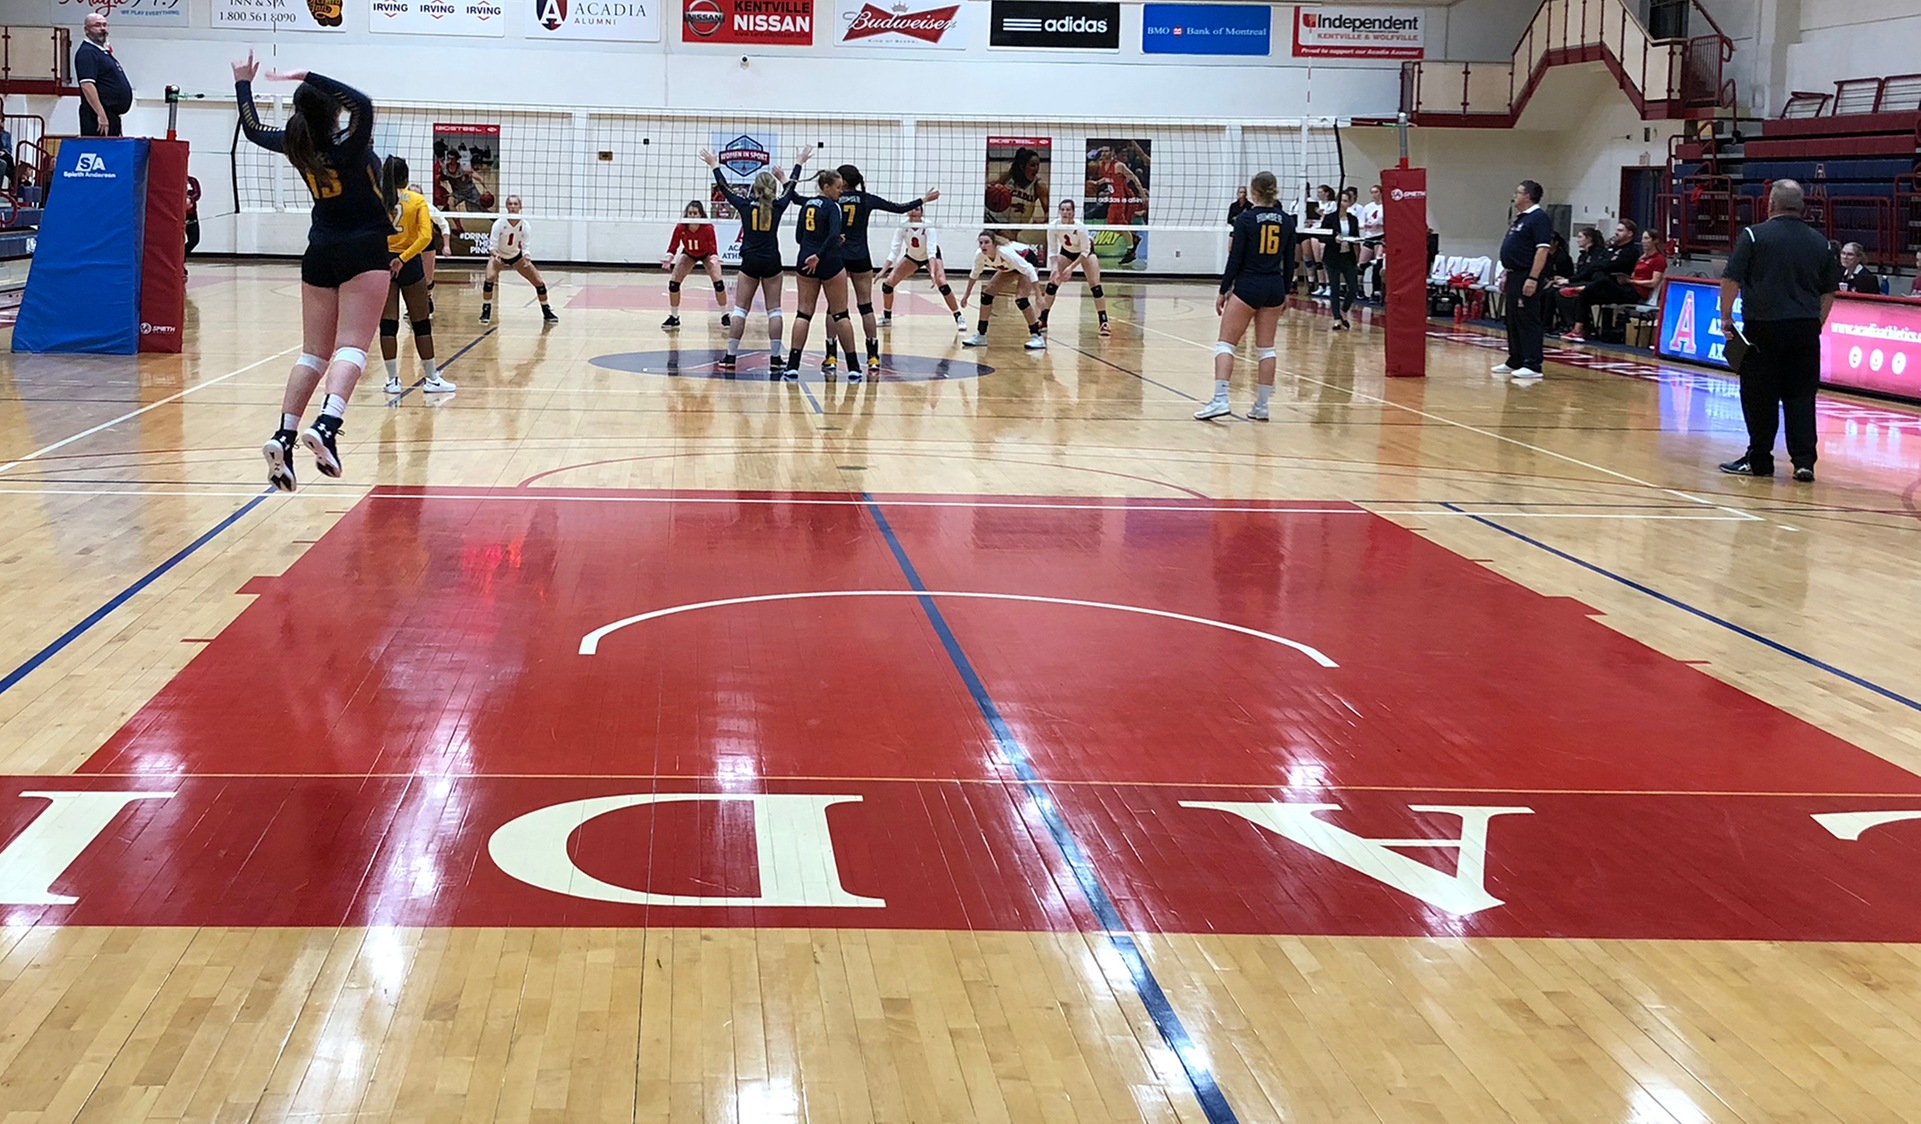 WEARY HAWKS DROP 3-0 MATCH TO ACADIA AS EAST COAST SWING CONTINUES